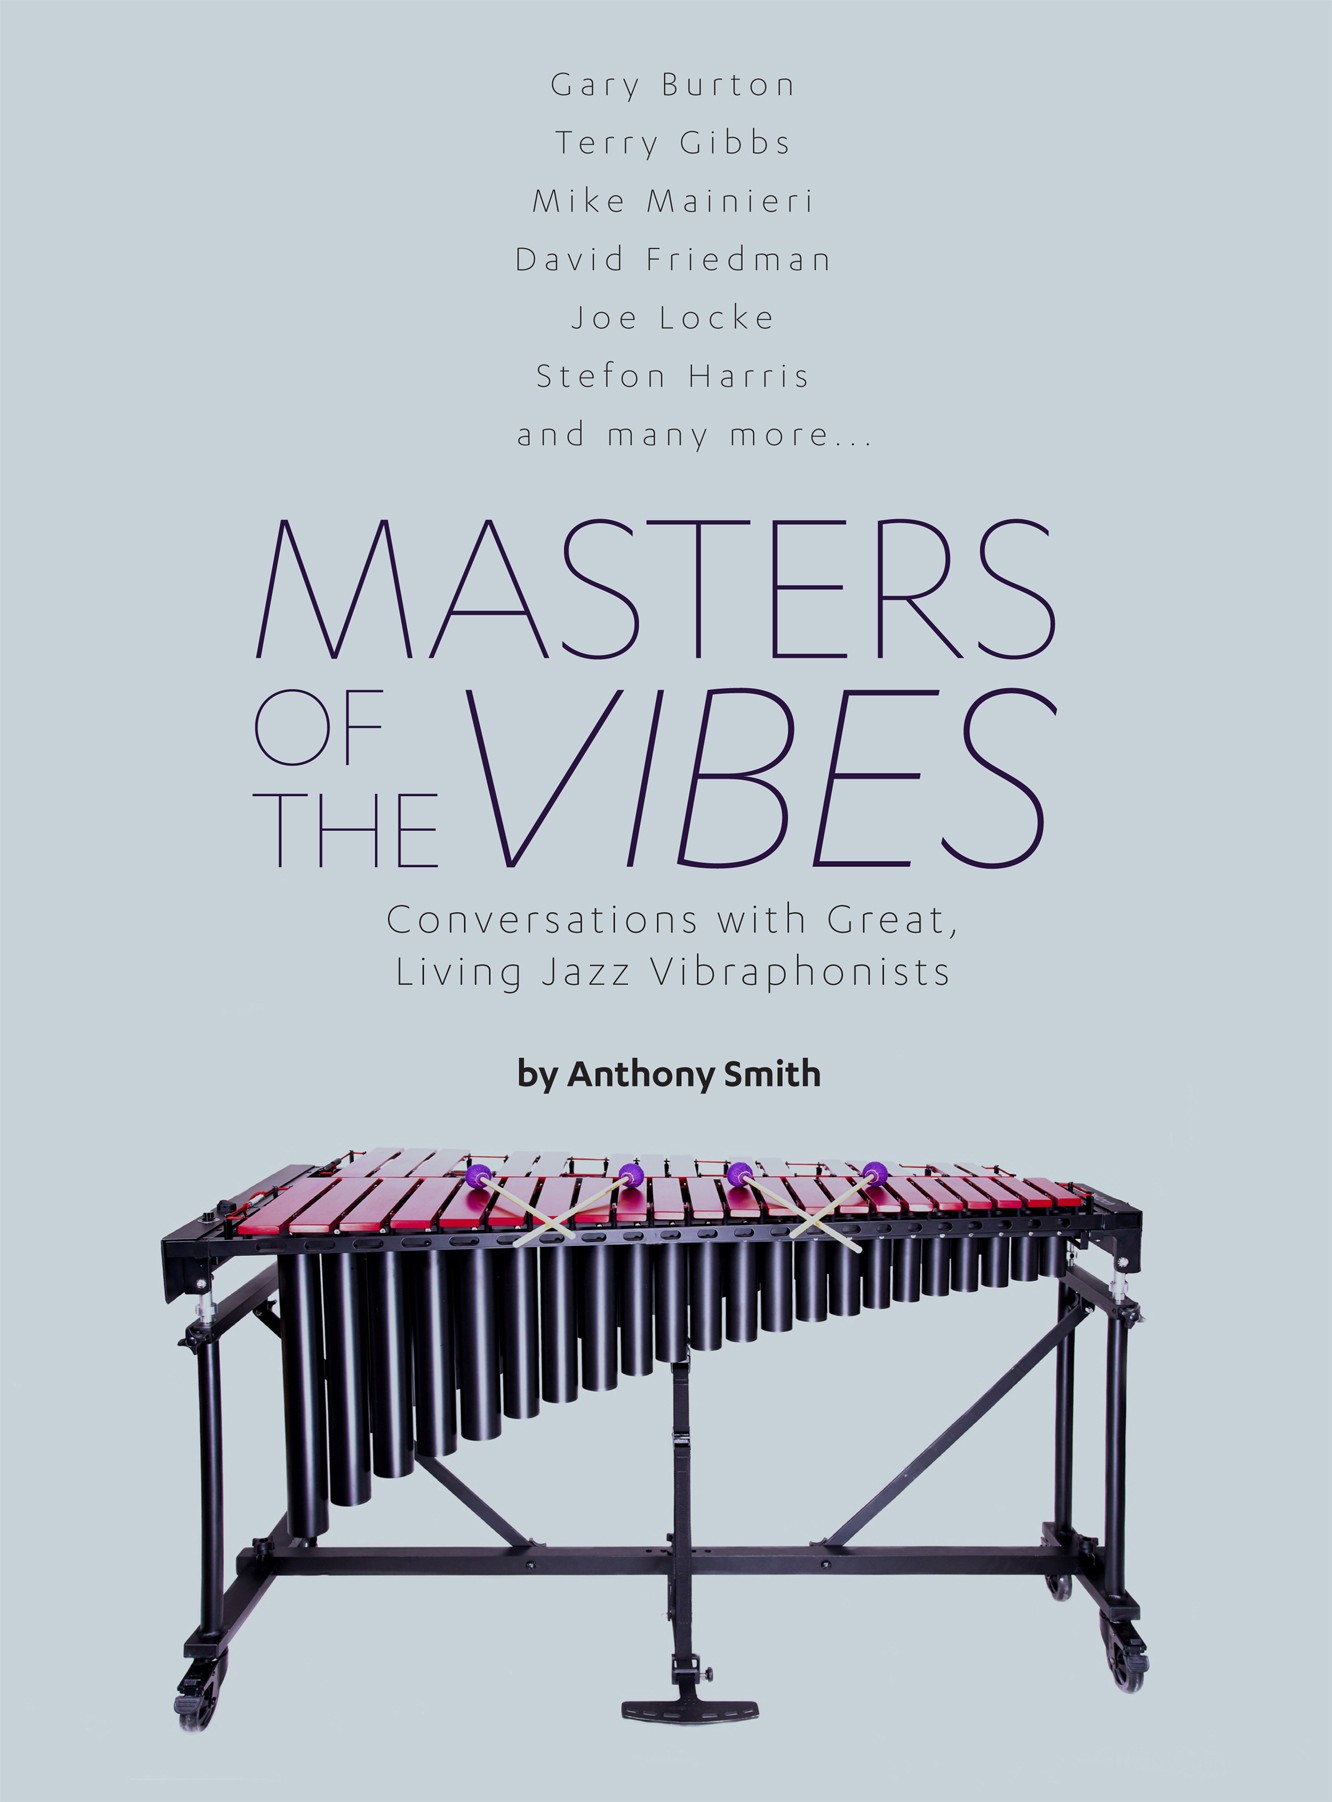 Masters of the Vibes by Anthony Smith